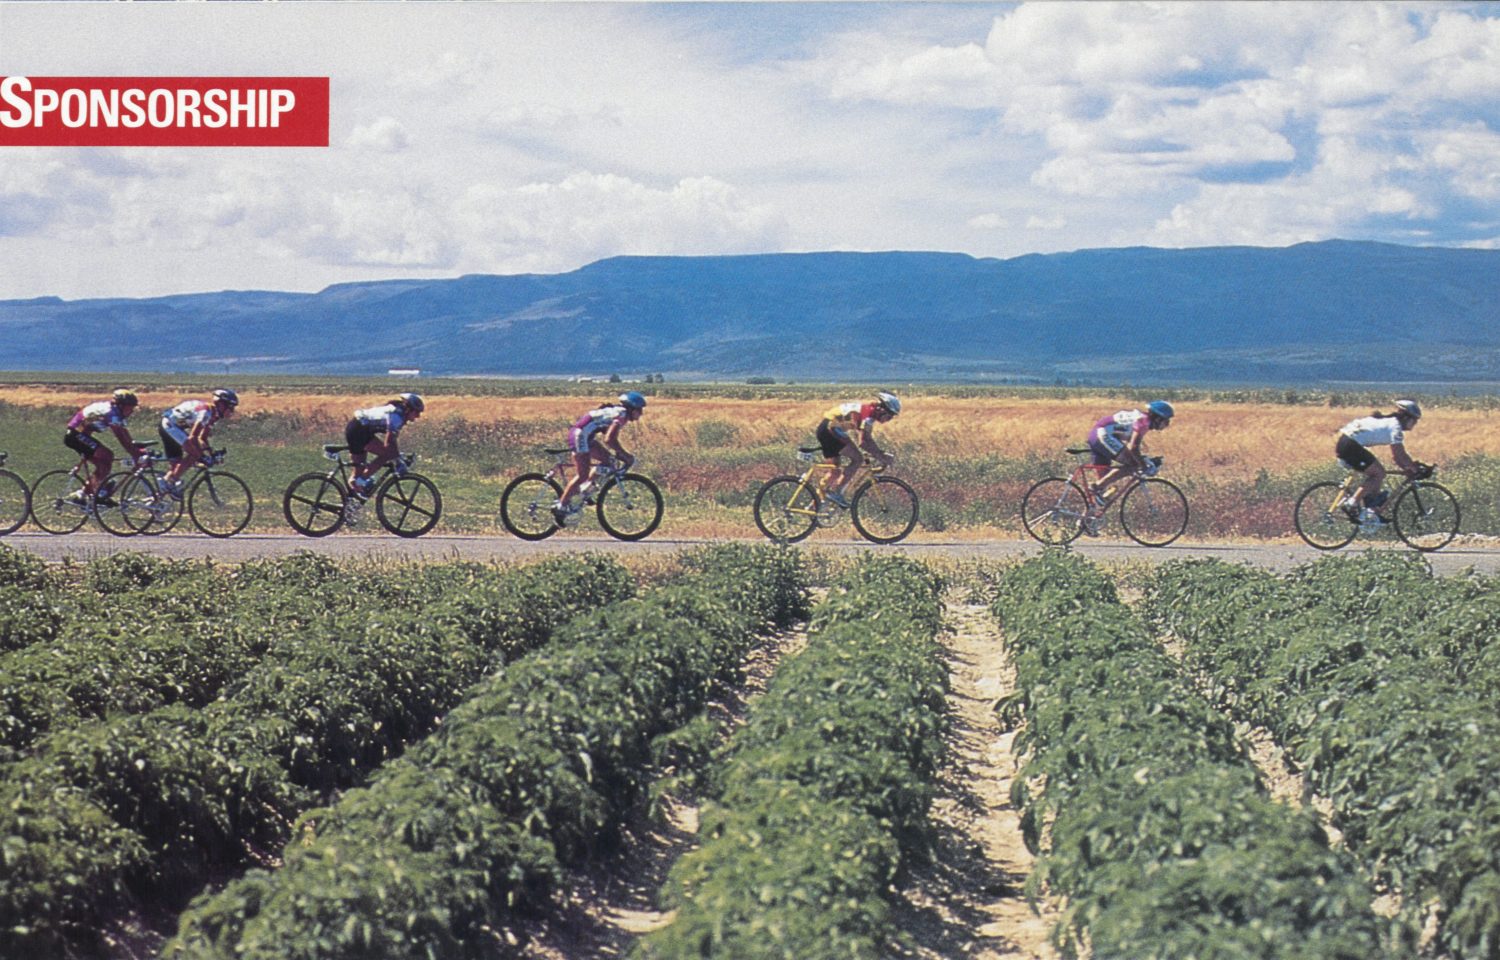 Women cyclists riding on a road near rows of crops.